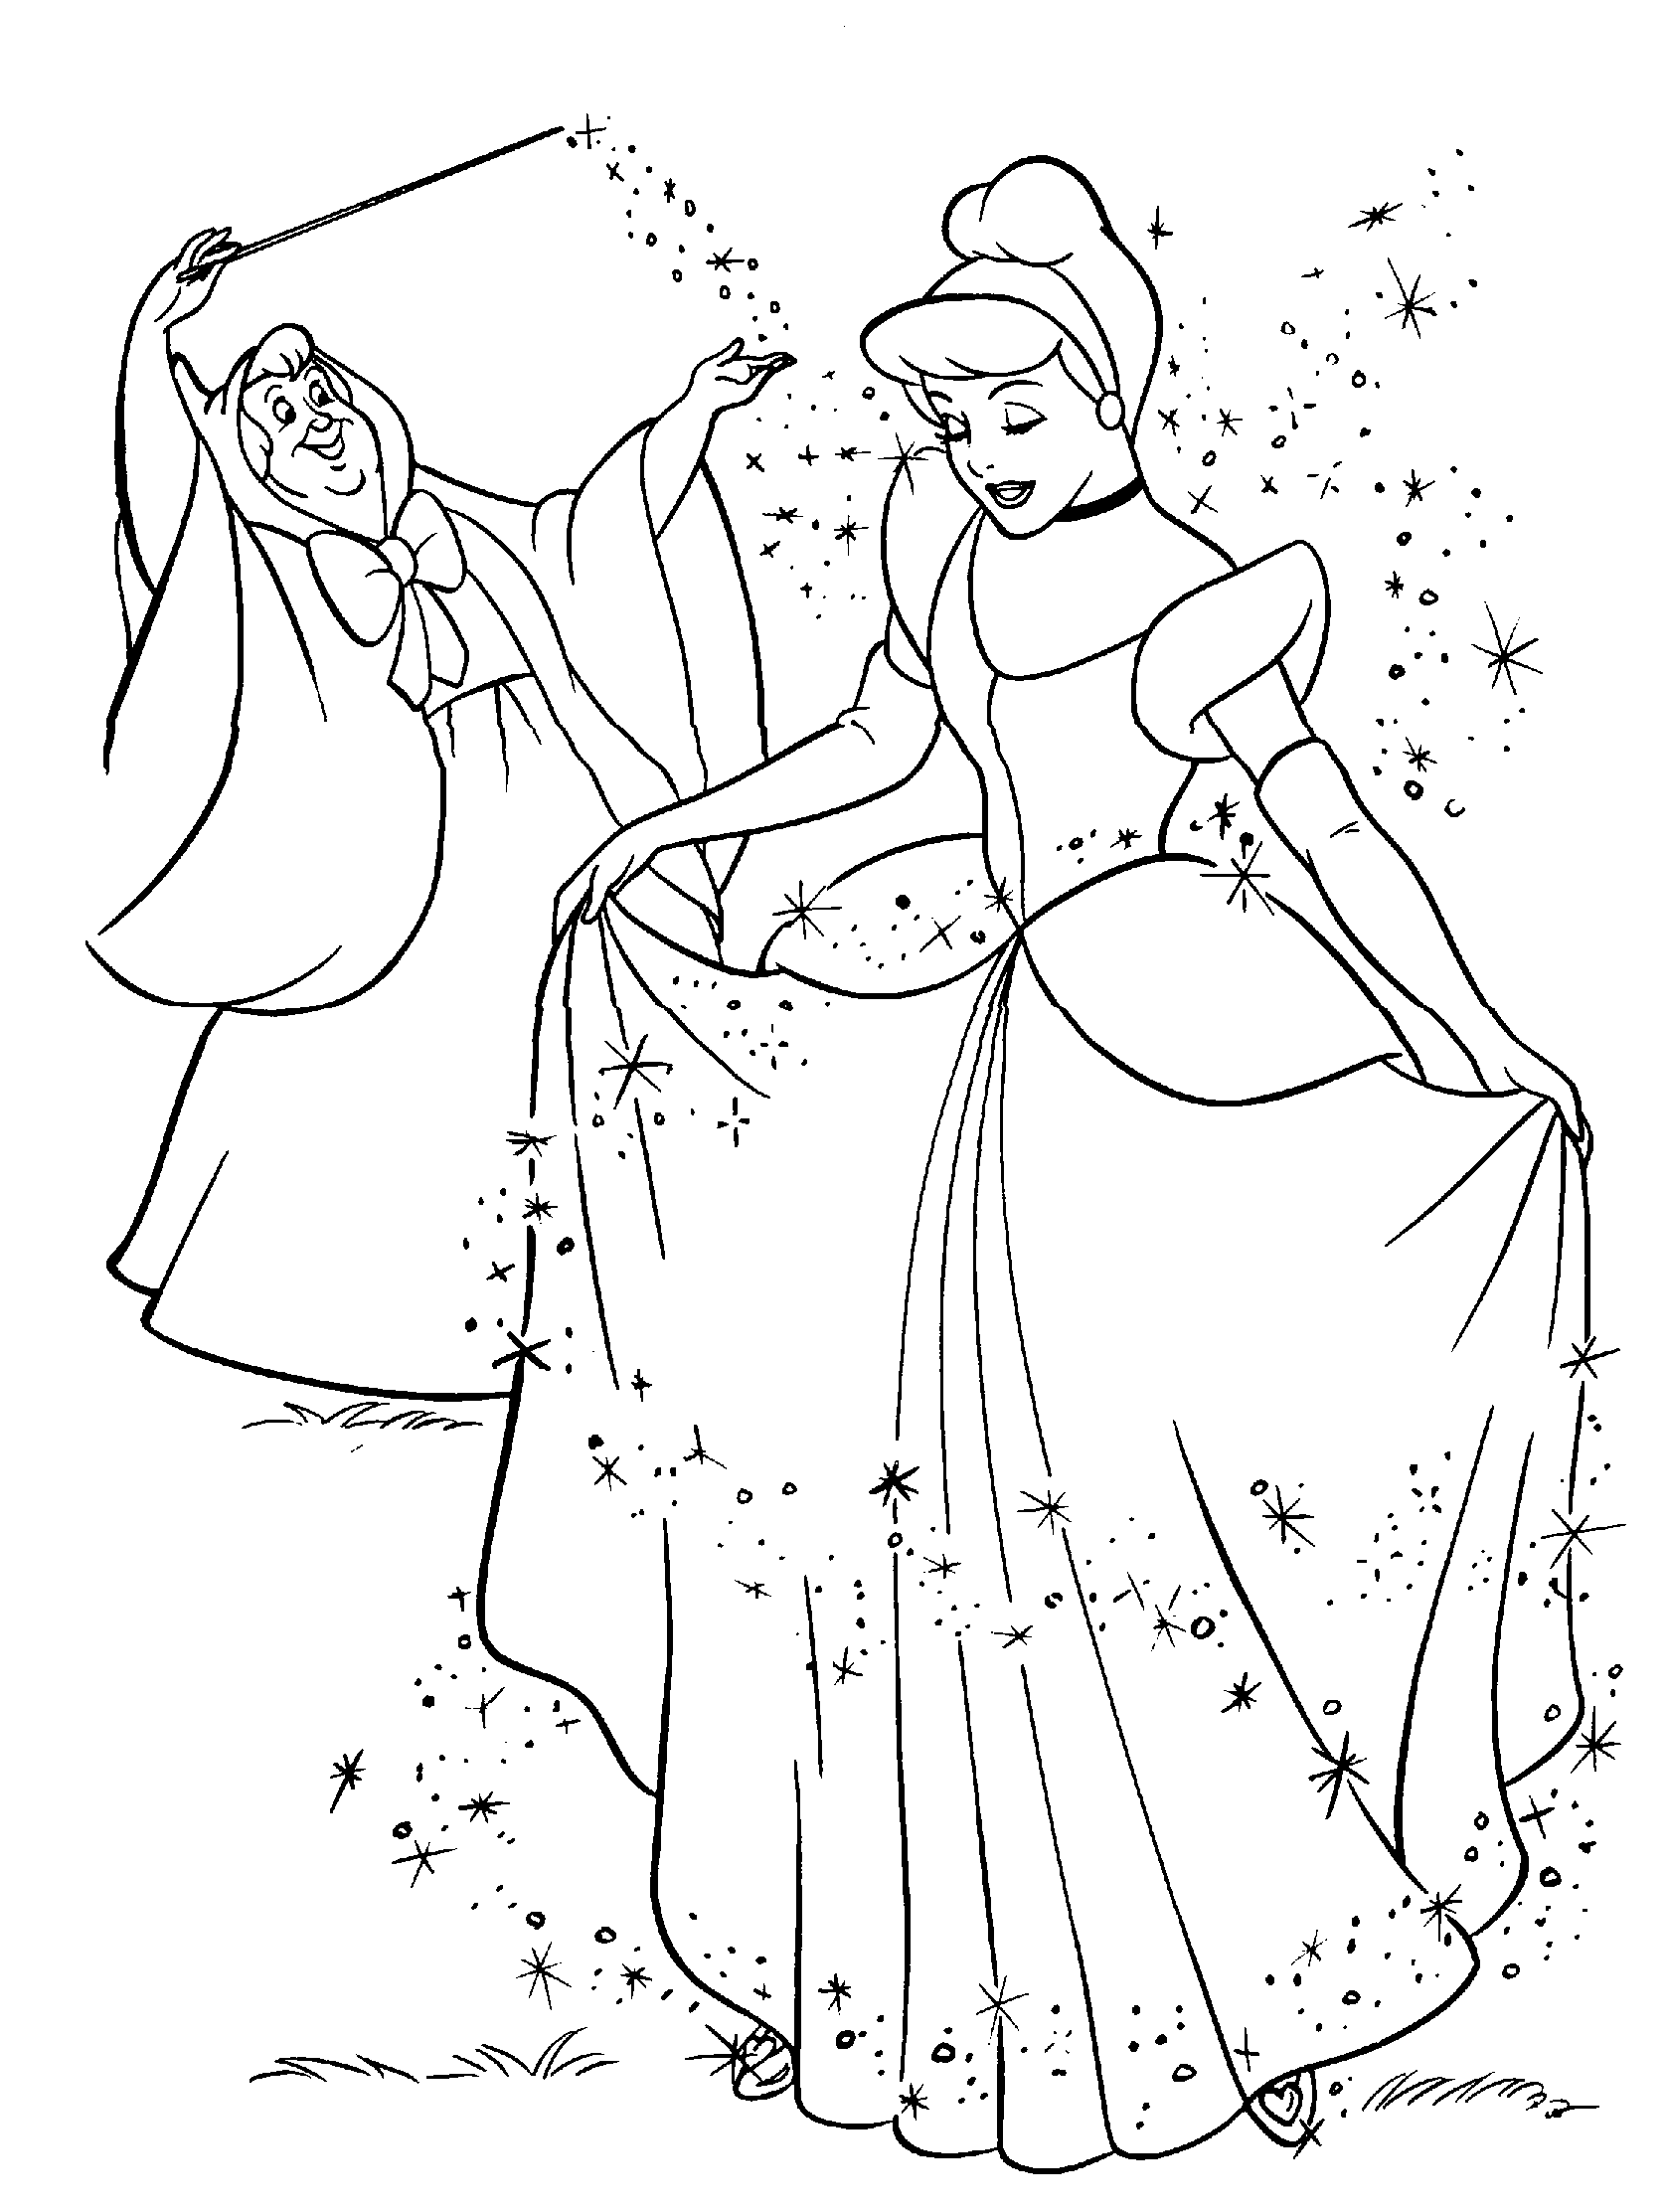 Free Printable Cinderella Coloring Pages For Kids Coloring Wallpapers Download Free Images Wallpaper [coloring654.blogspot.com]